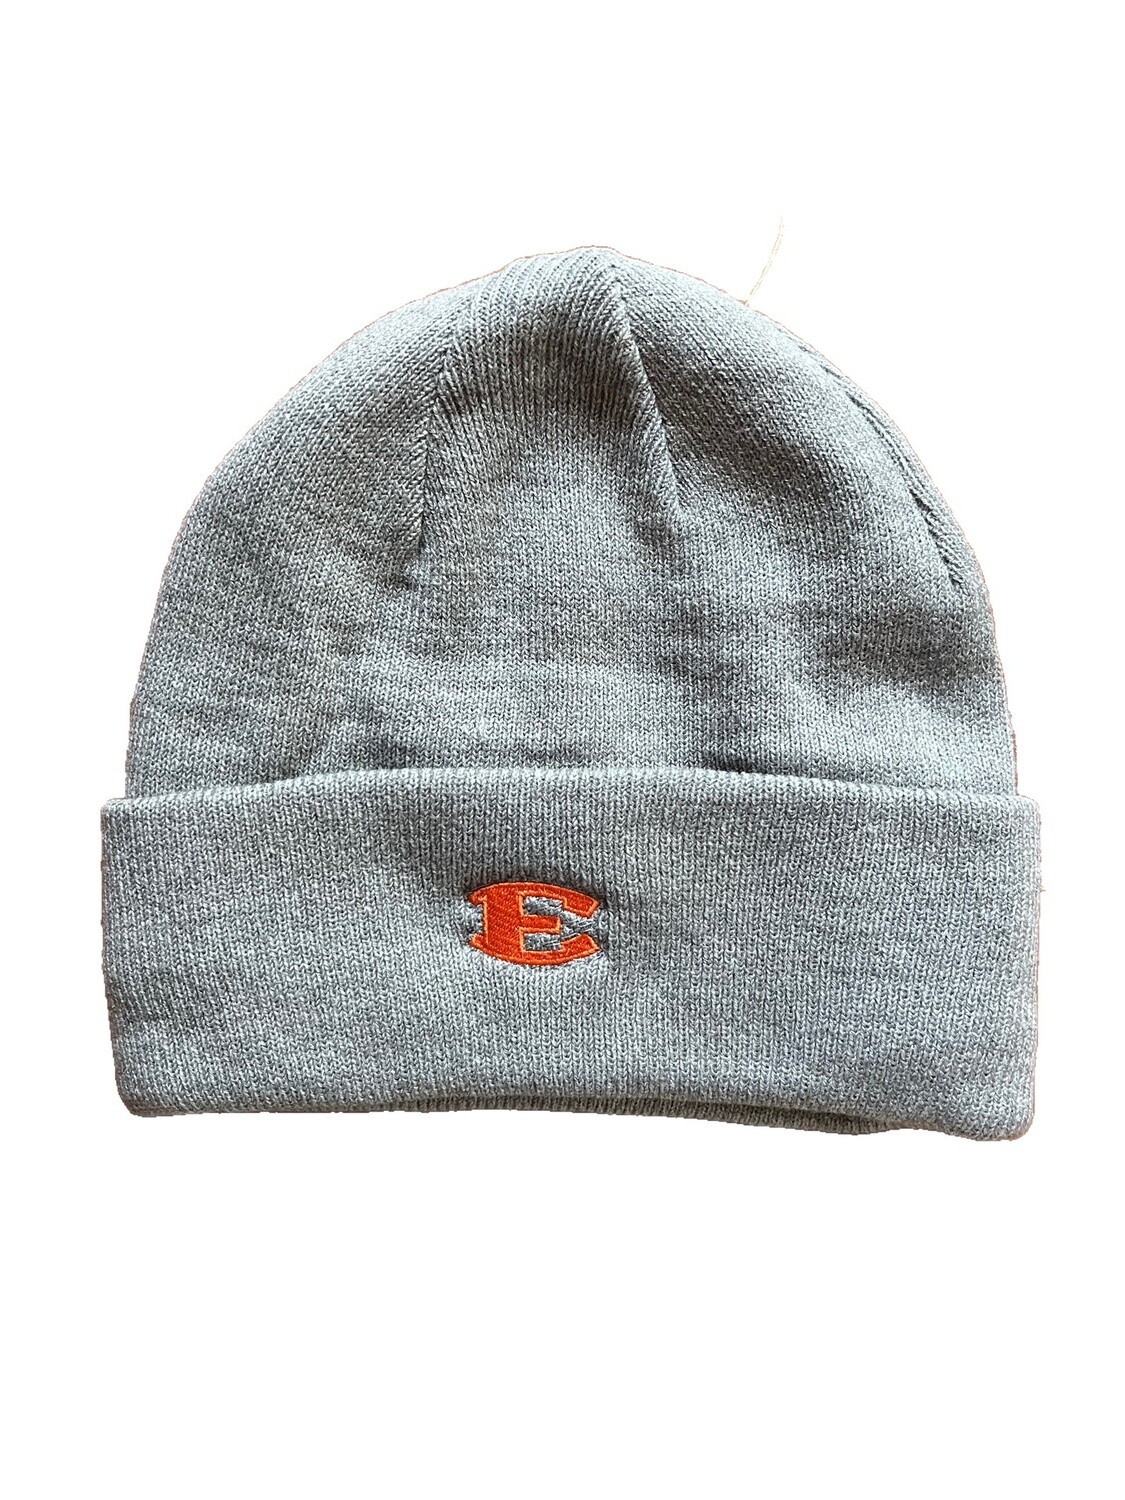 Imperial Adult Cuffed Beanie, Color: Gray